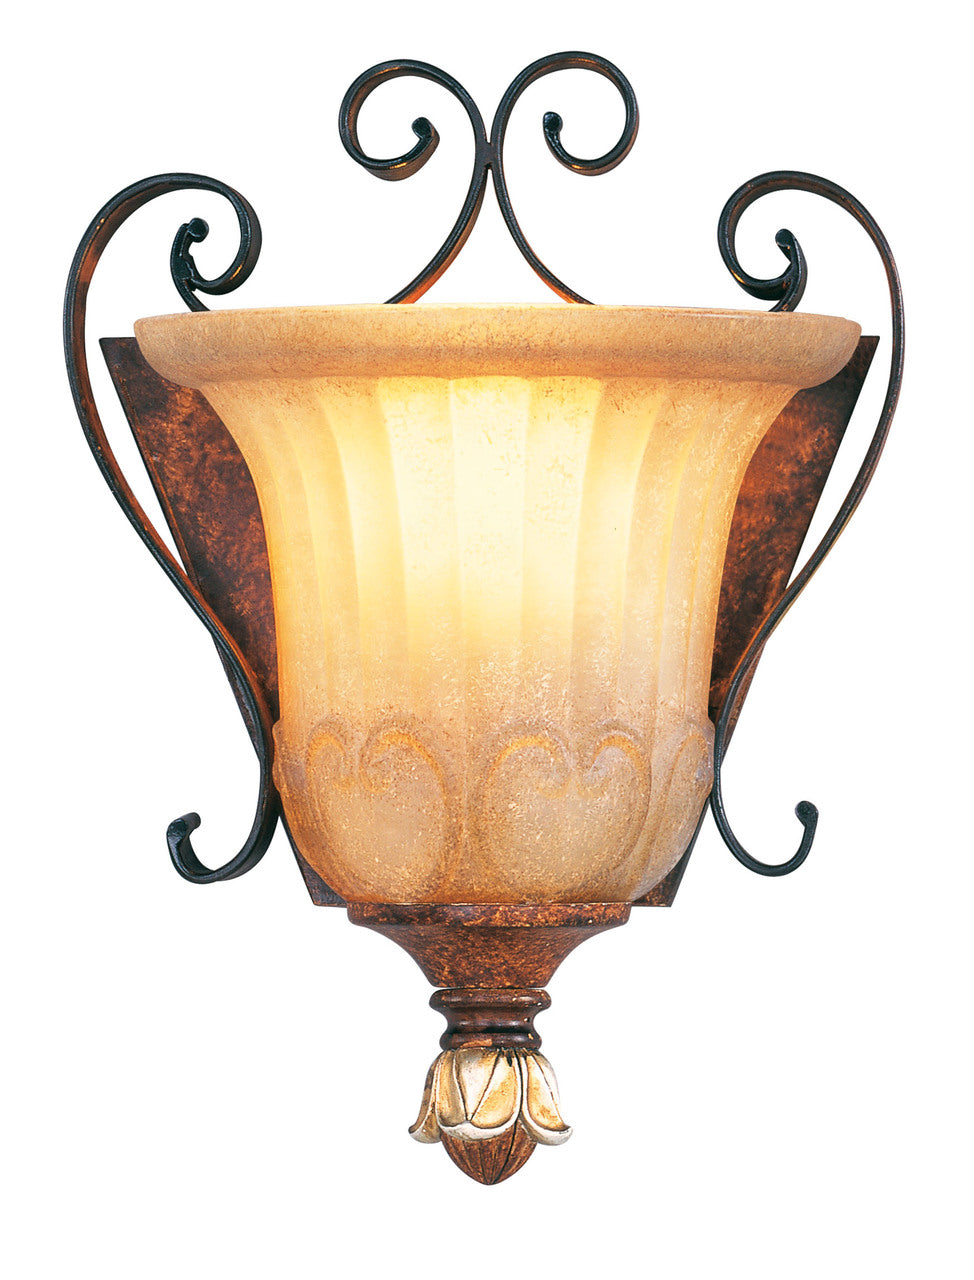 LIVEX Lighting 8560-63 Villa Verona Wall Sconce in Verona Bronze with Aged Gold Leaf Accents (1 Light)